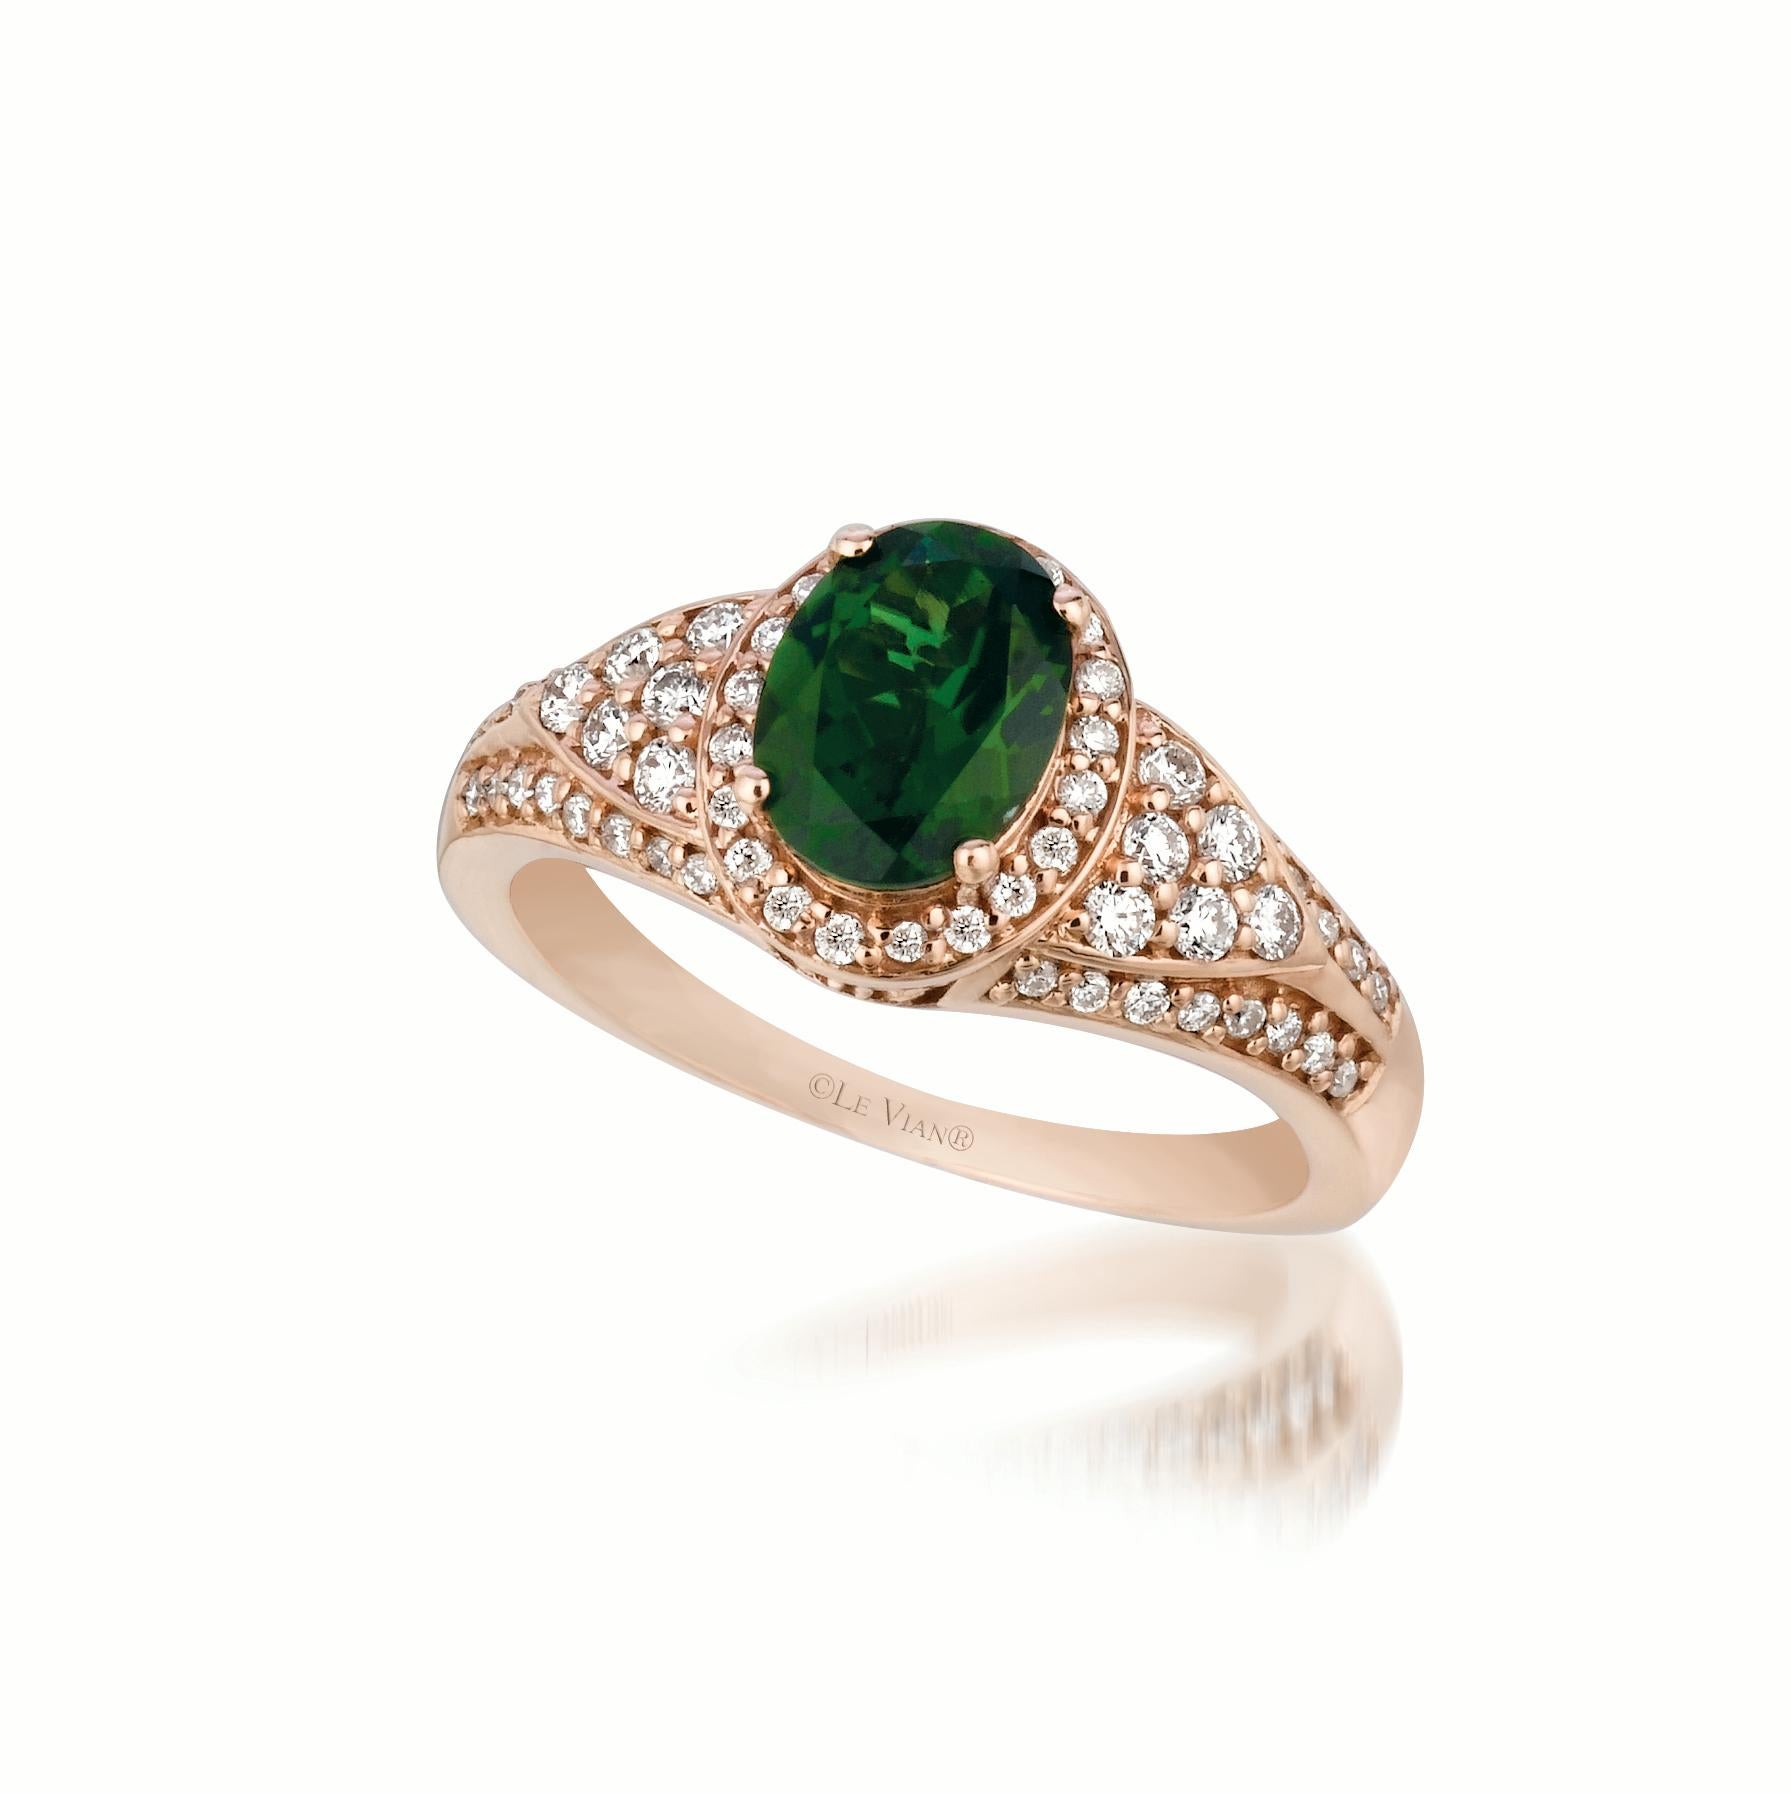 Le Vian® Ring featuring 1 cts. Pistachio Diopside®, 3/8 cts. Vanilla Diamonds®  set in 14K Strawberry Gold®
